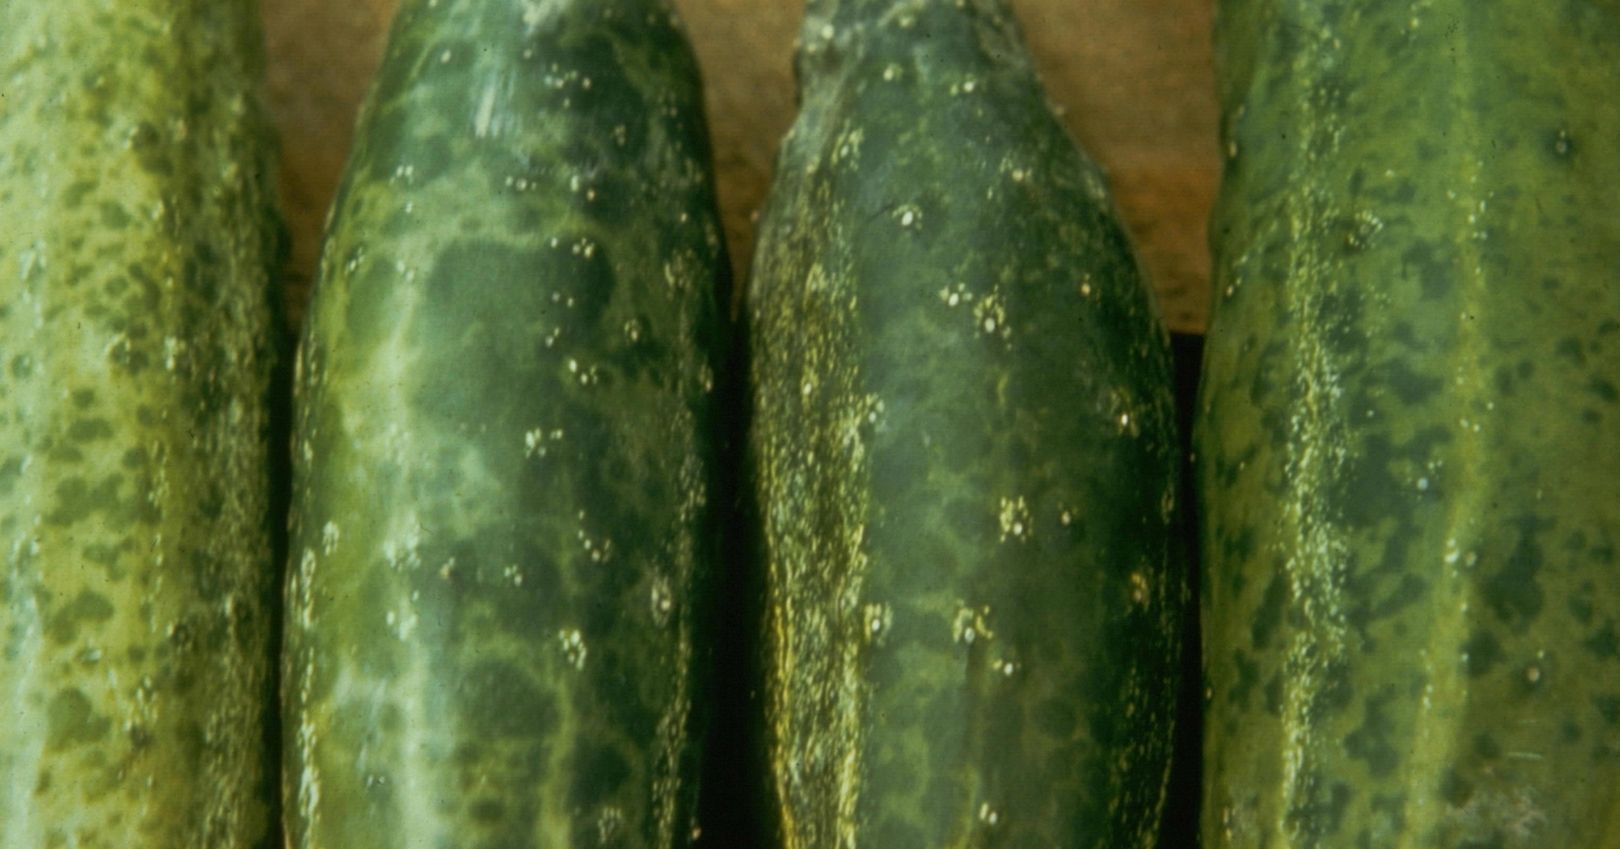 Cucumber Fruits Showing Symptoms of Infection with CMV (William M. Brown Jr., Bugwood.org)